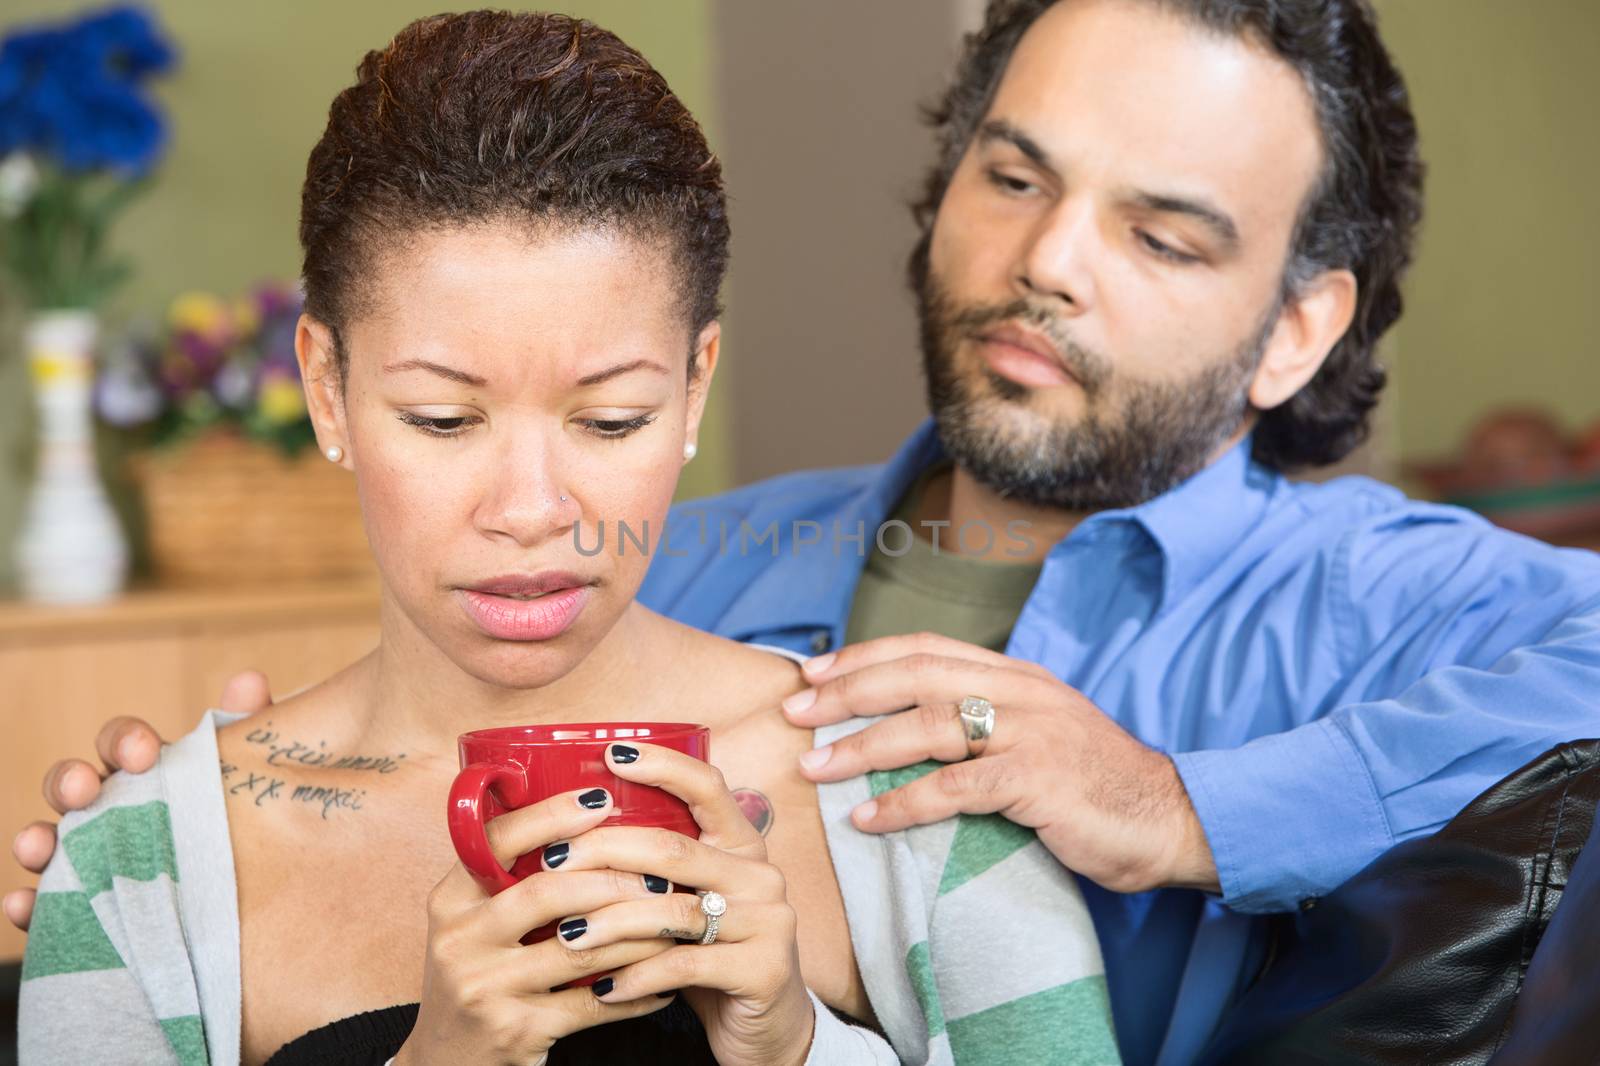 Sad woman with tattoo and concerned man with beard